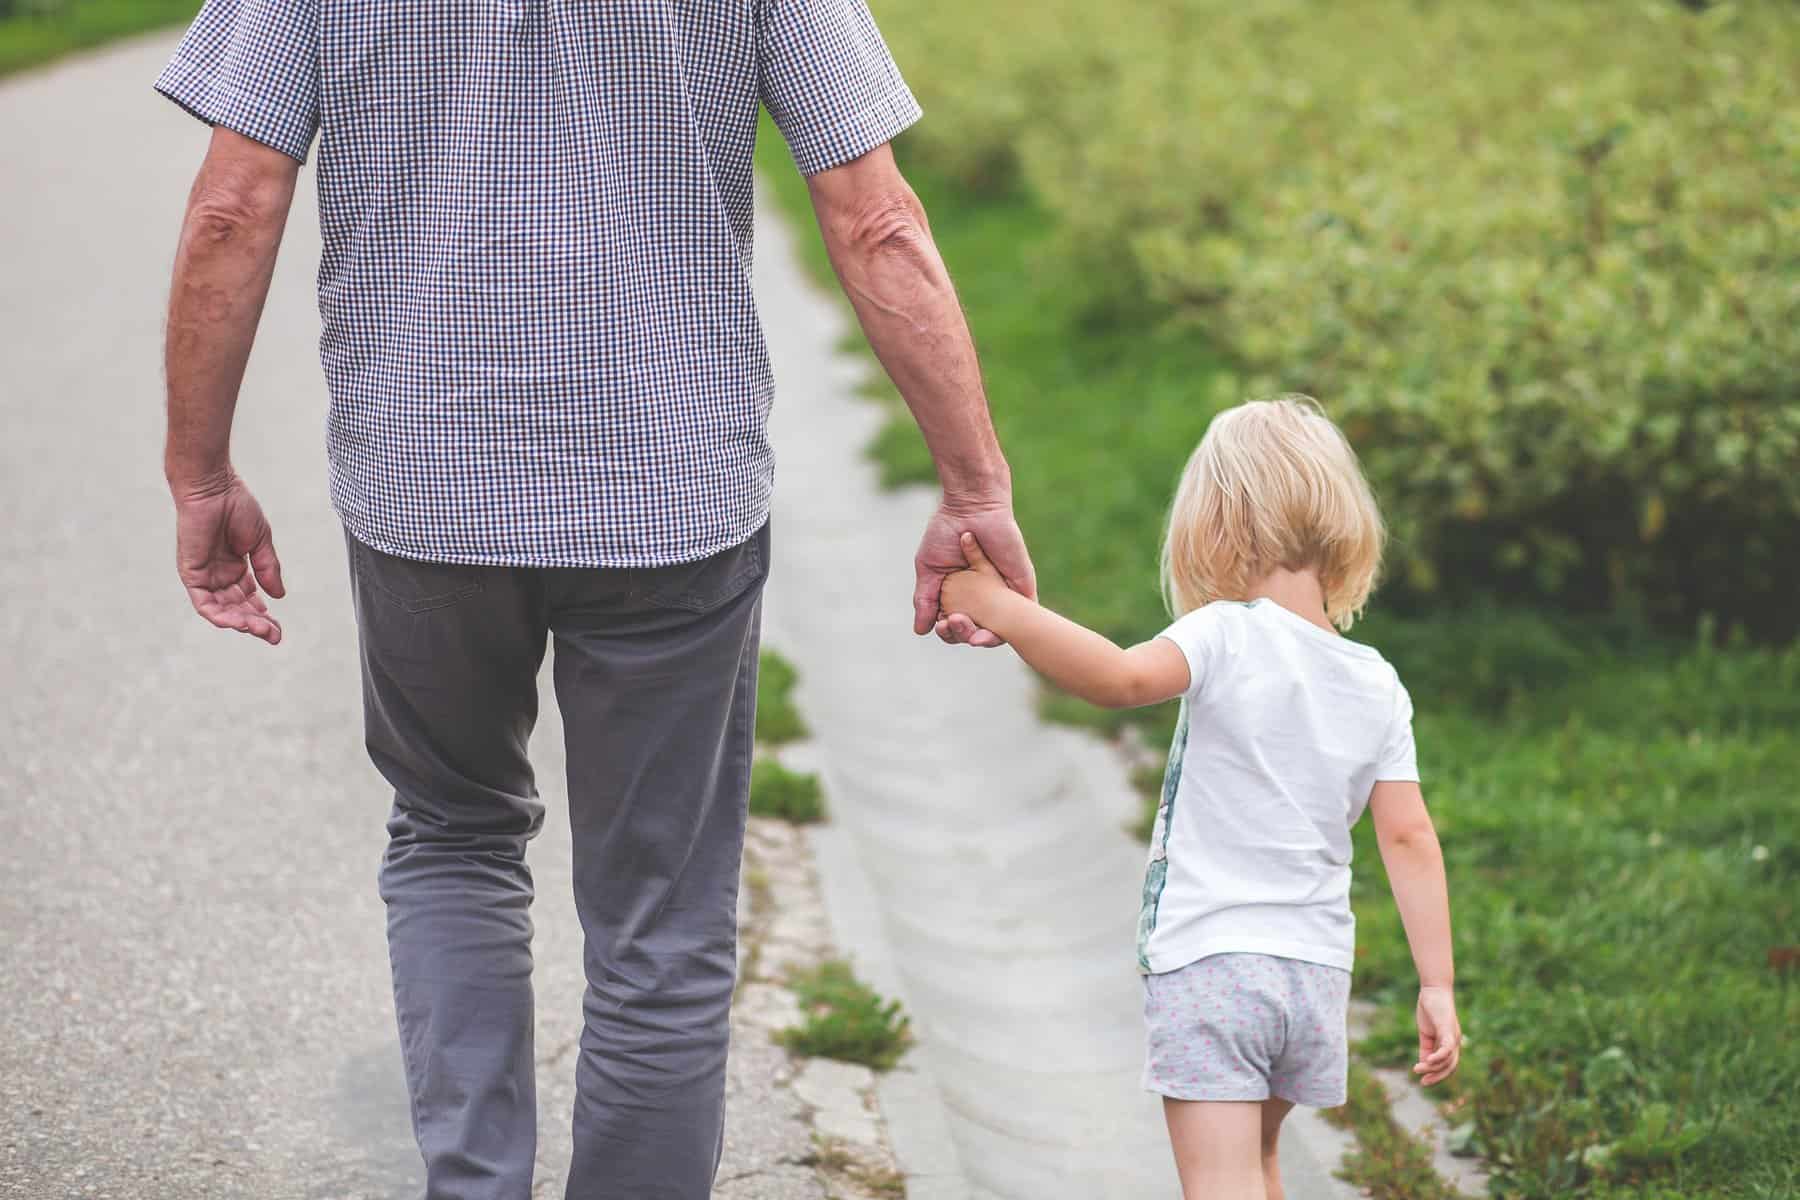 A man walks away from the camera holding the hand of a toddler as they walk side-by-side.